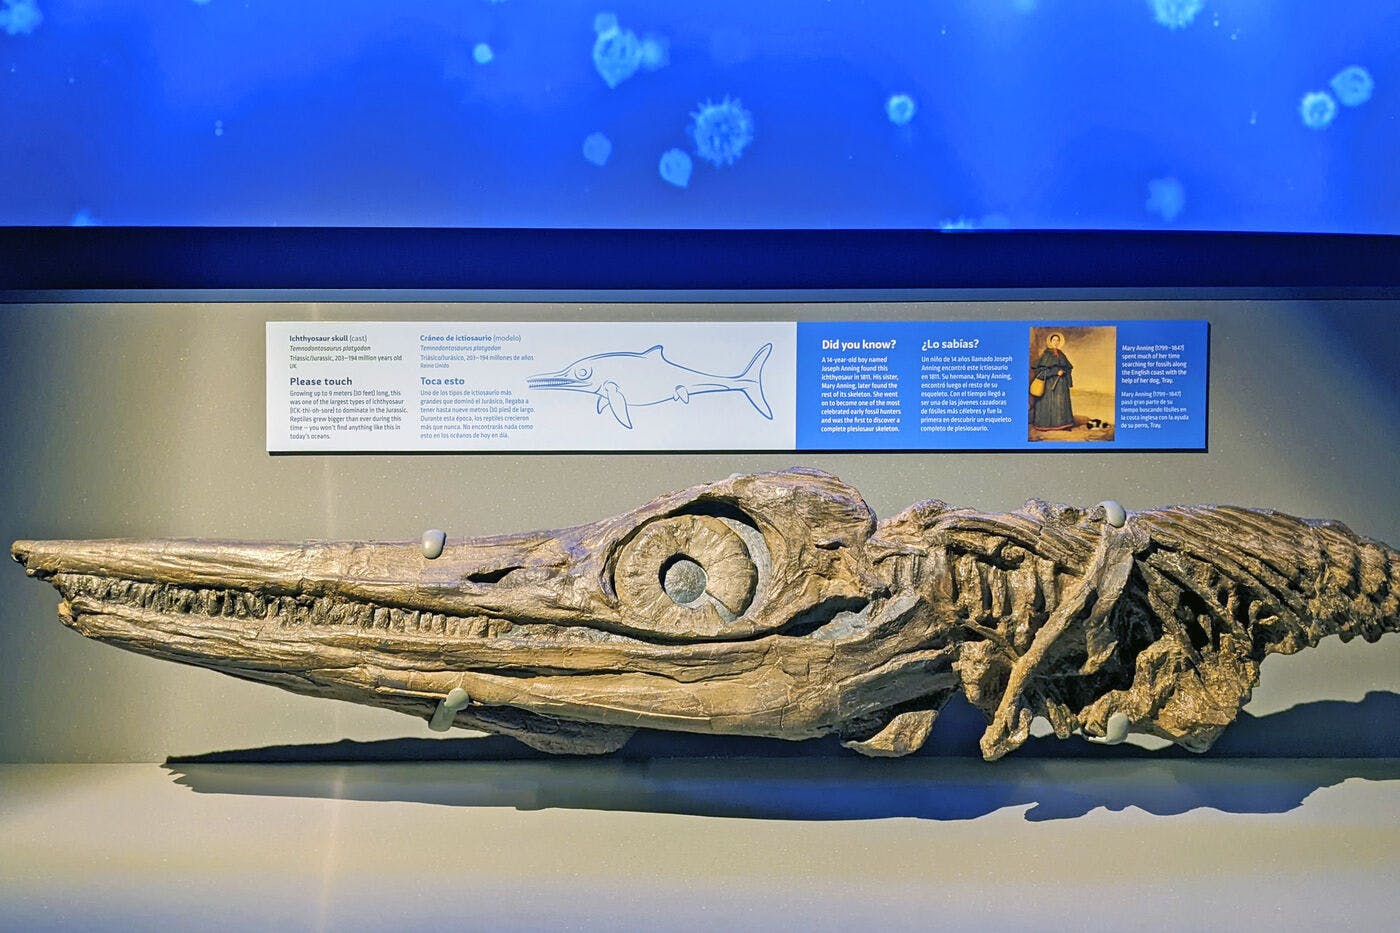 A cast of an Ichthyosaurus skull fossil, displayed in a museum exhibit, with graphic panels behind and dramatic lighting.